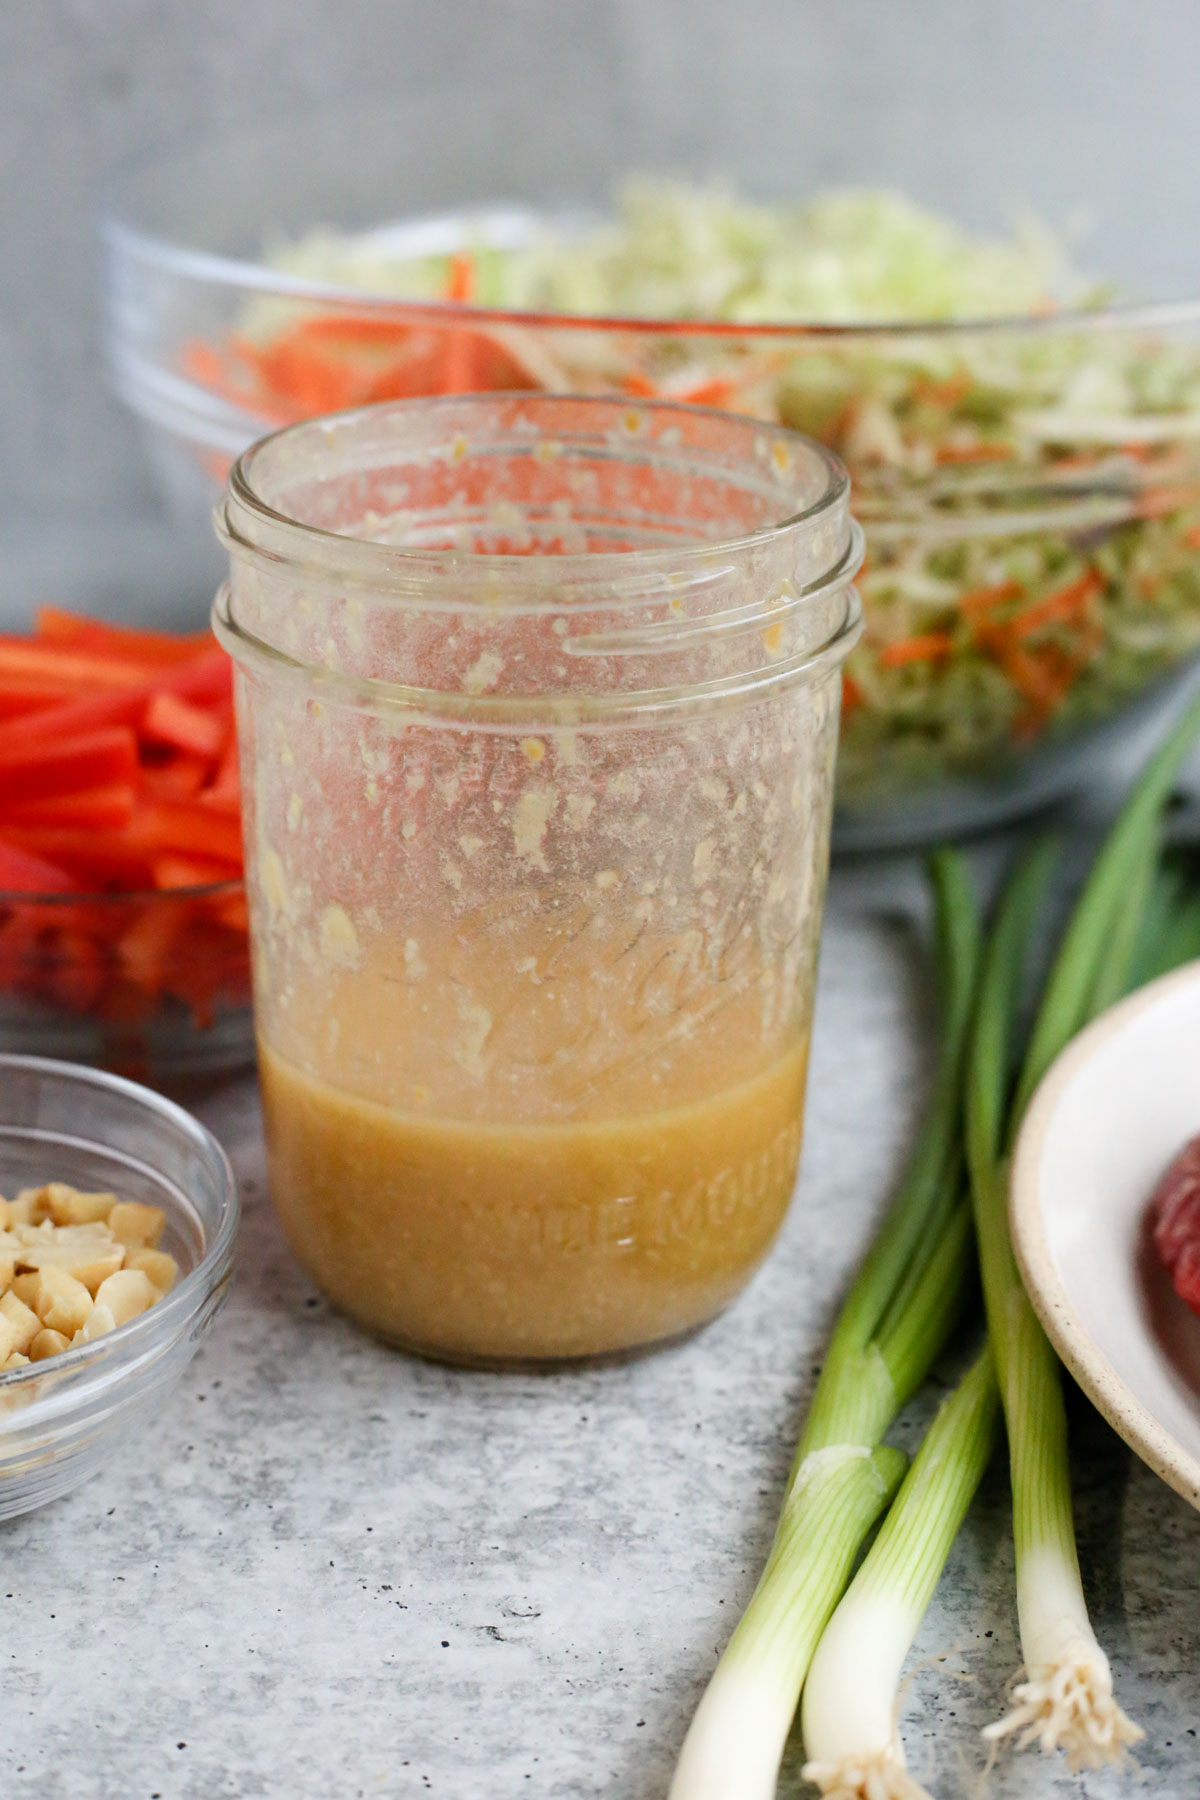 A small glass jar of a chunky salad dressing made using grated ginger and miso, sitting on a cement colored kitchen countertop in from of a large mixing bowl with steak salad ingredients